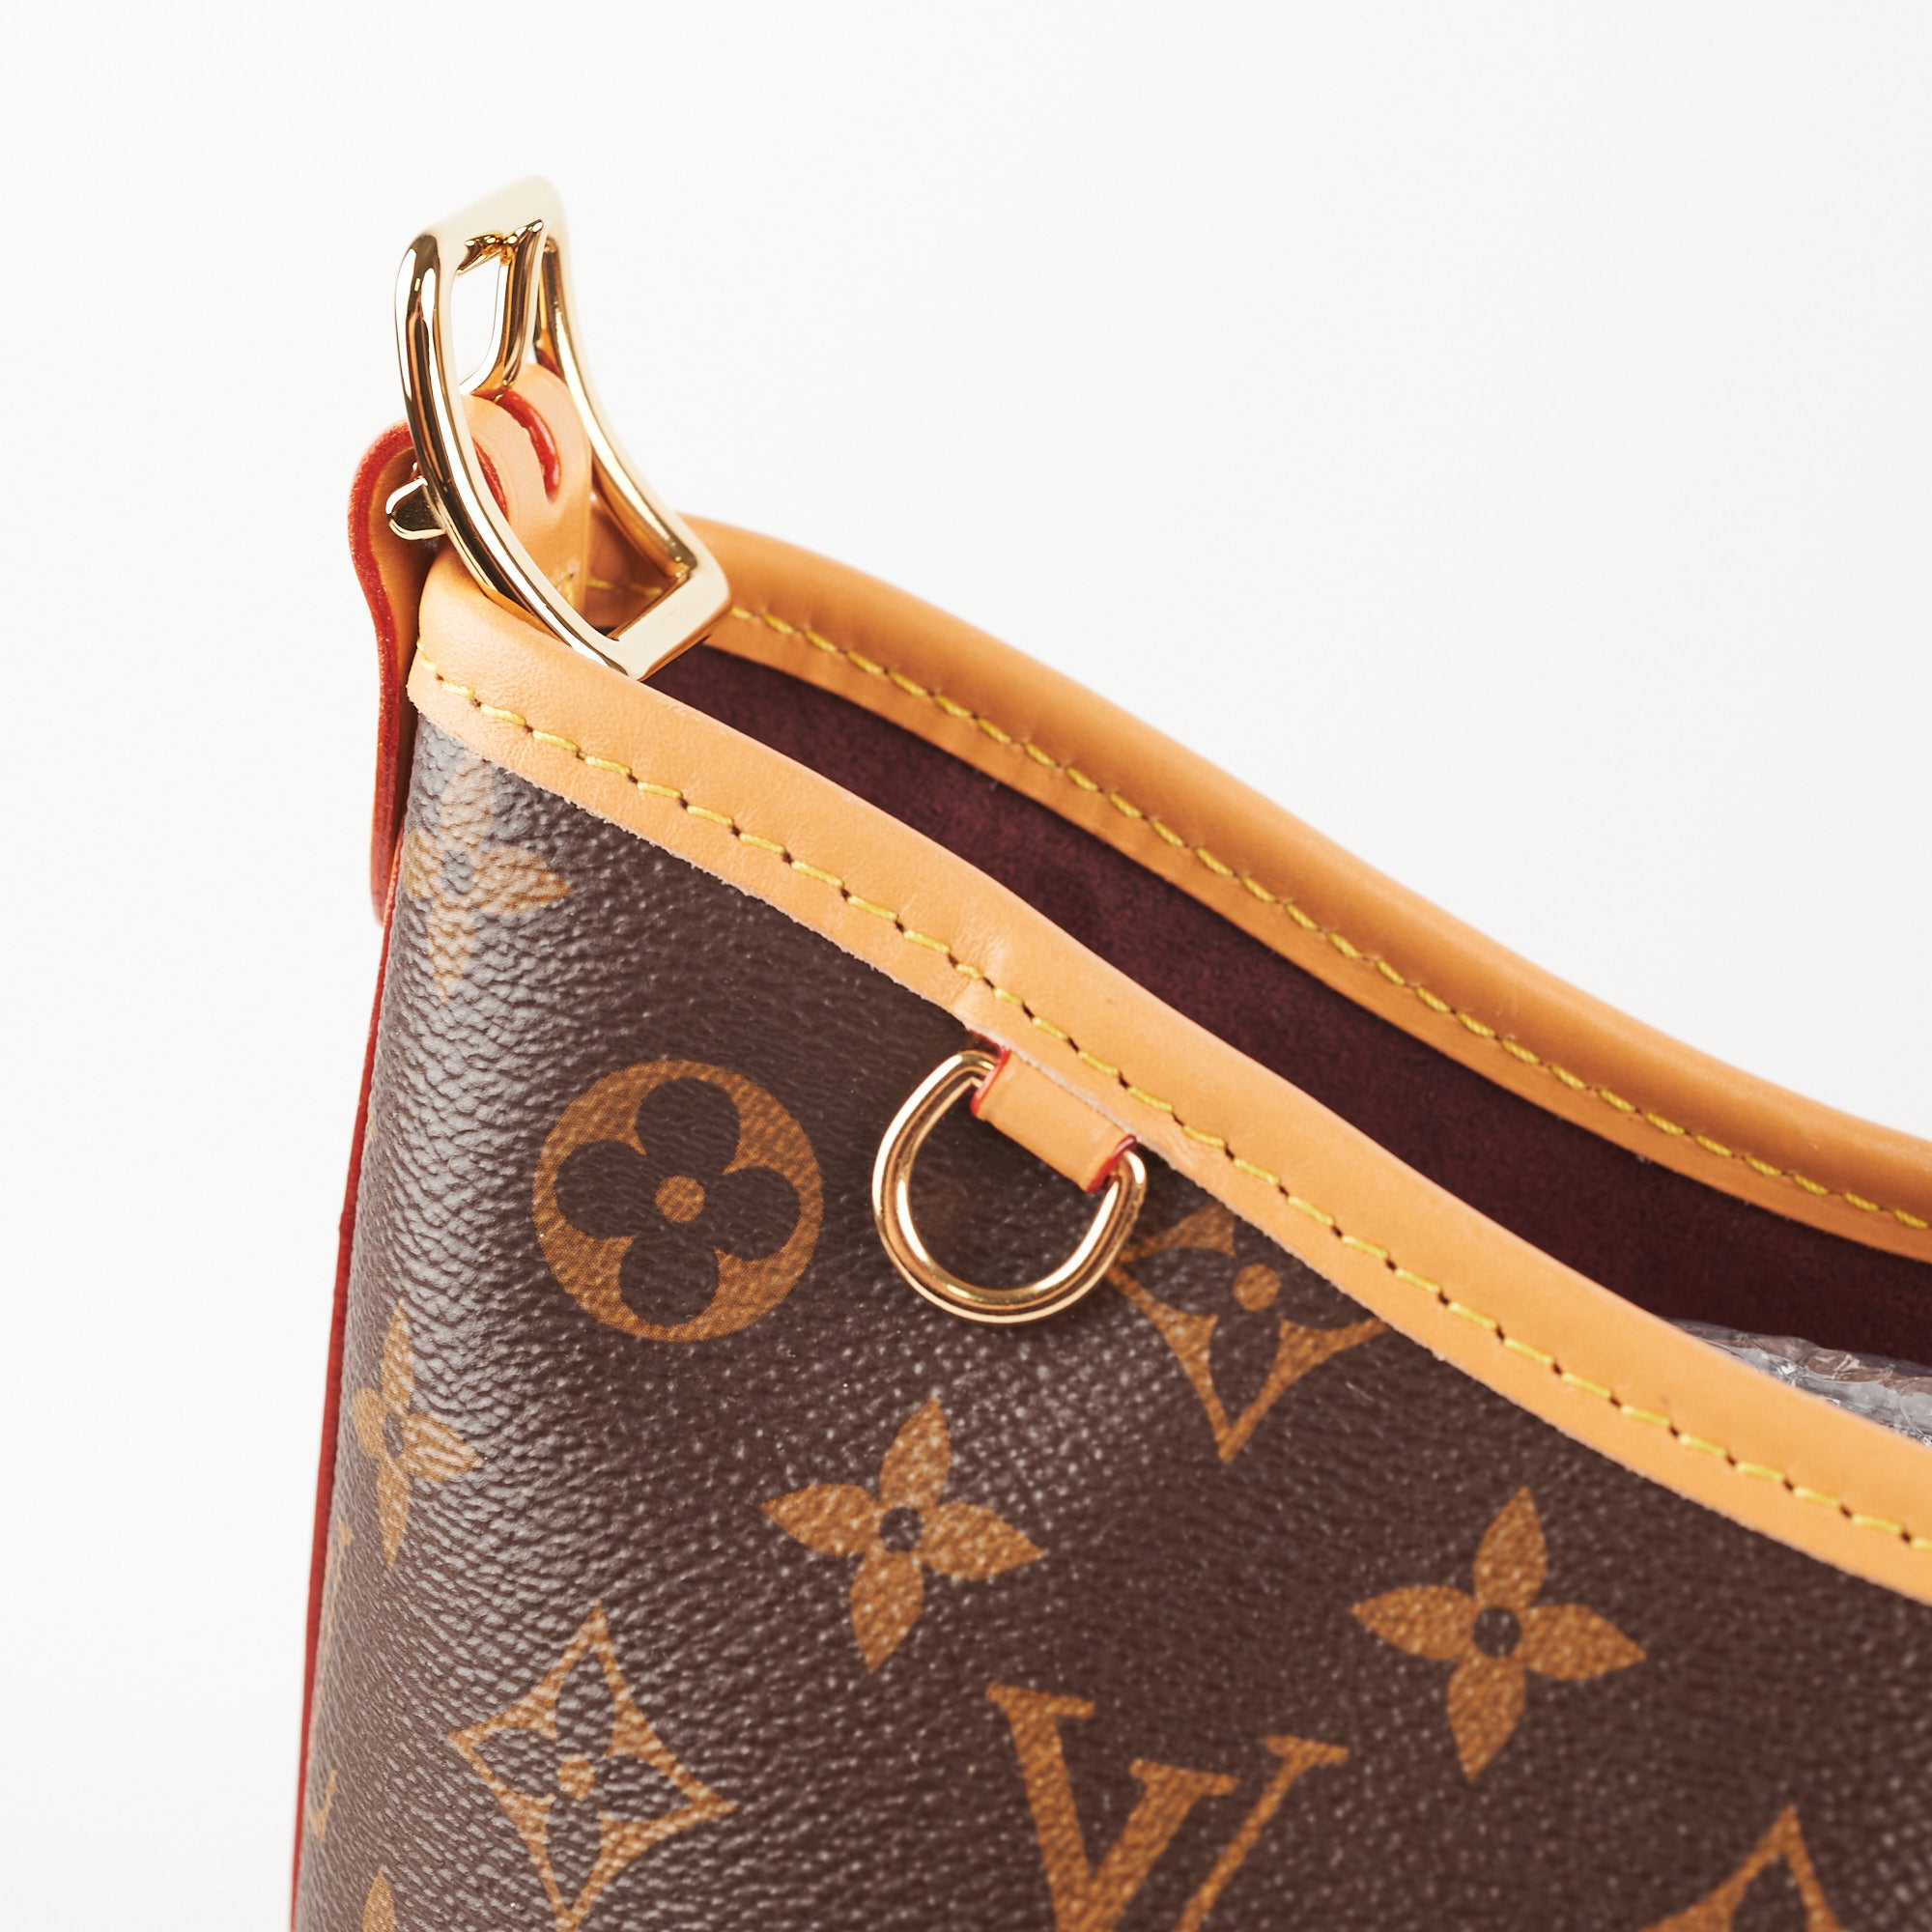 The new LV Carryall PM ❤️